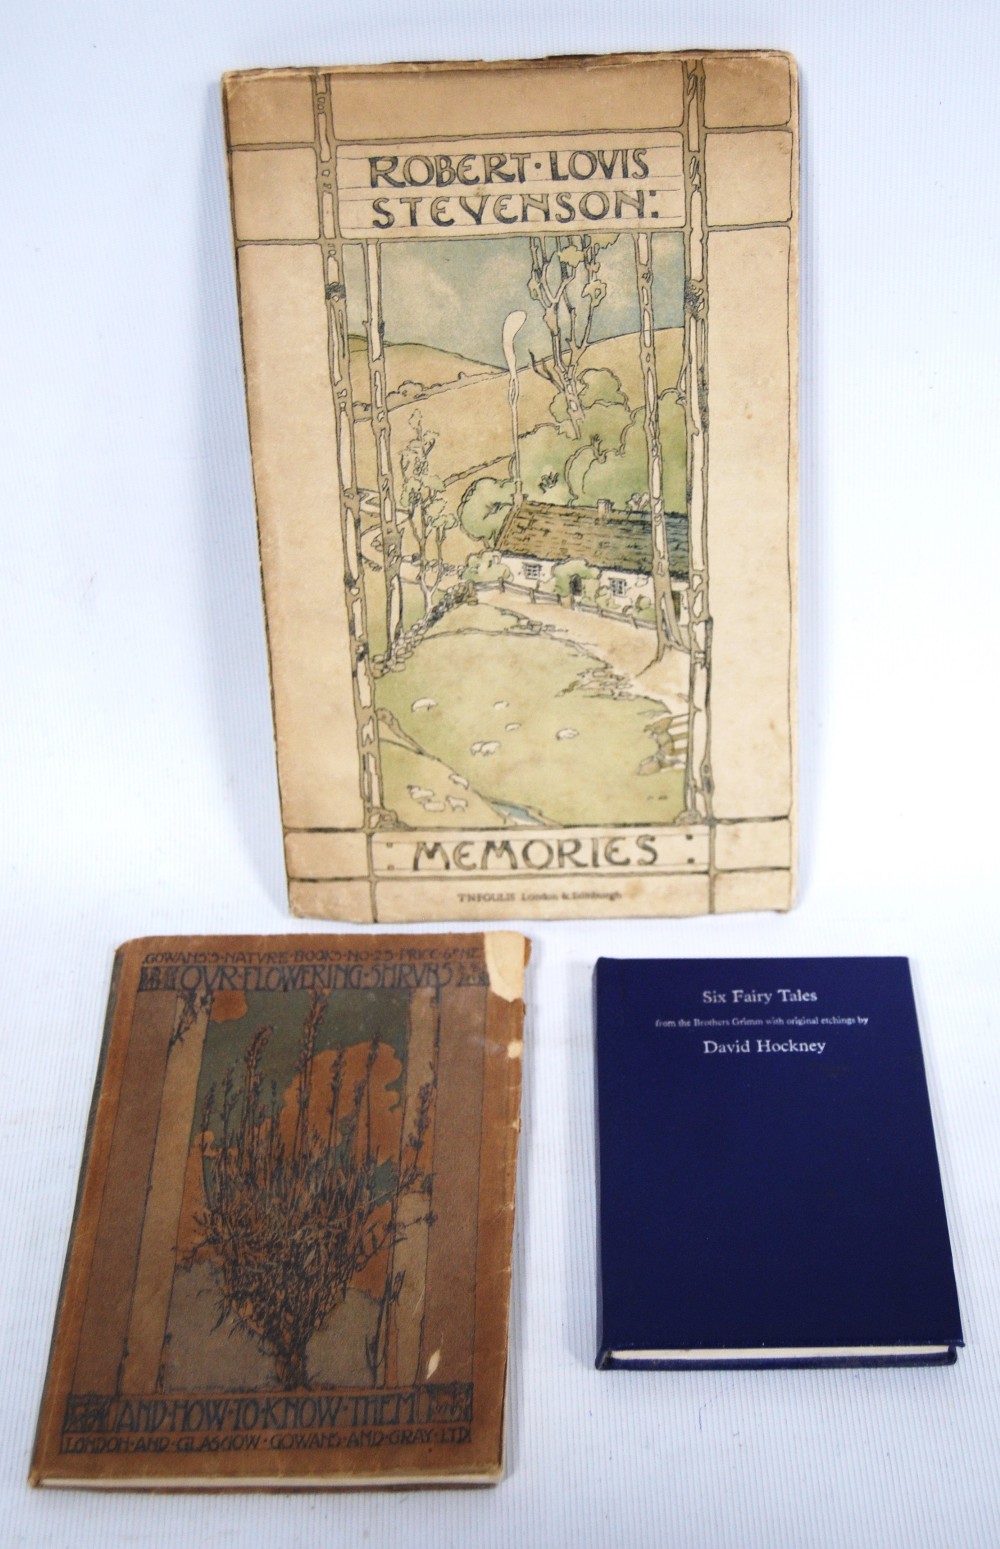 Robert Louis Stevenson, Memories, published by Foulis, cover illustrated by Jessie Marion King,